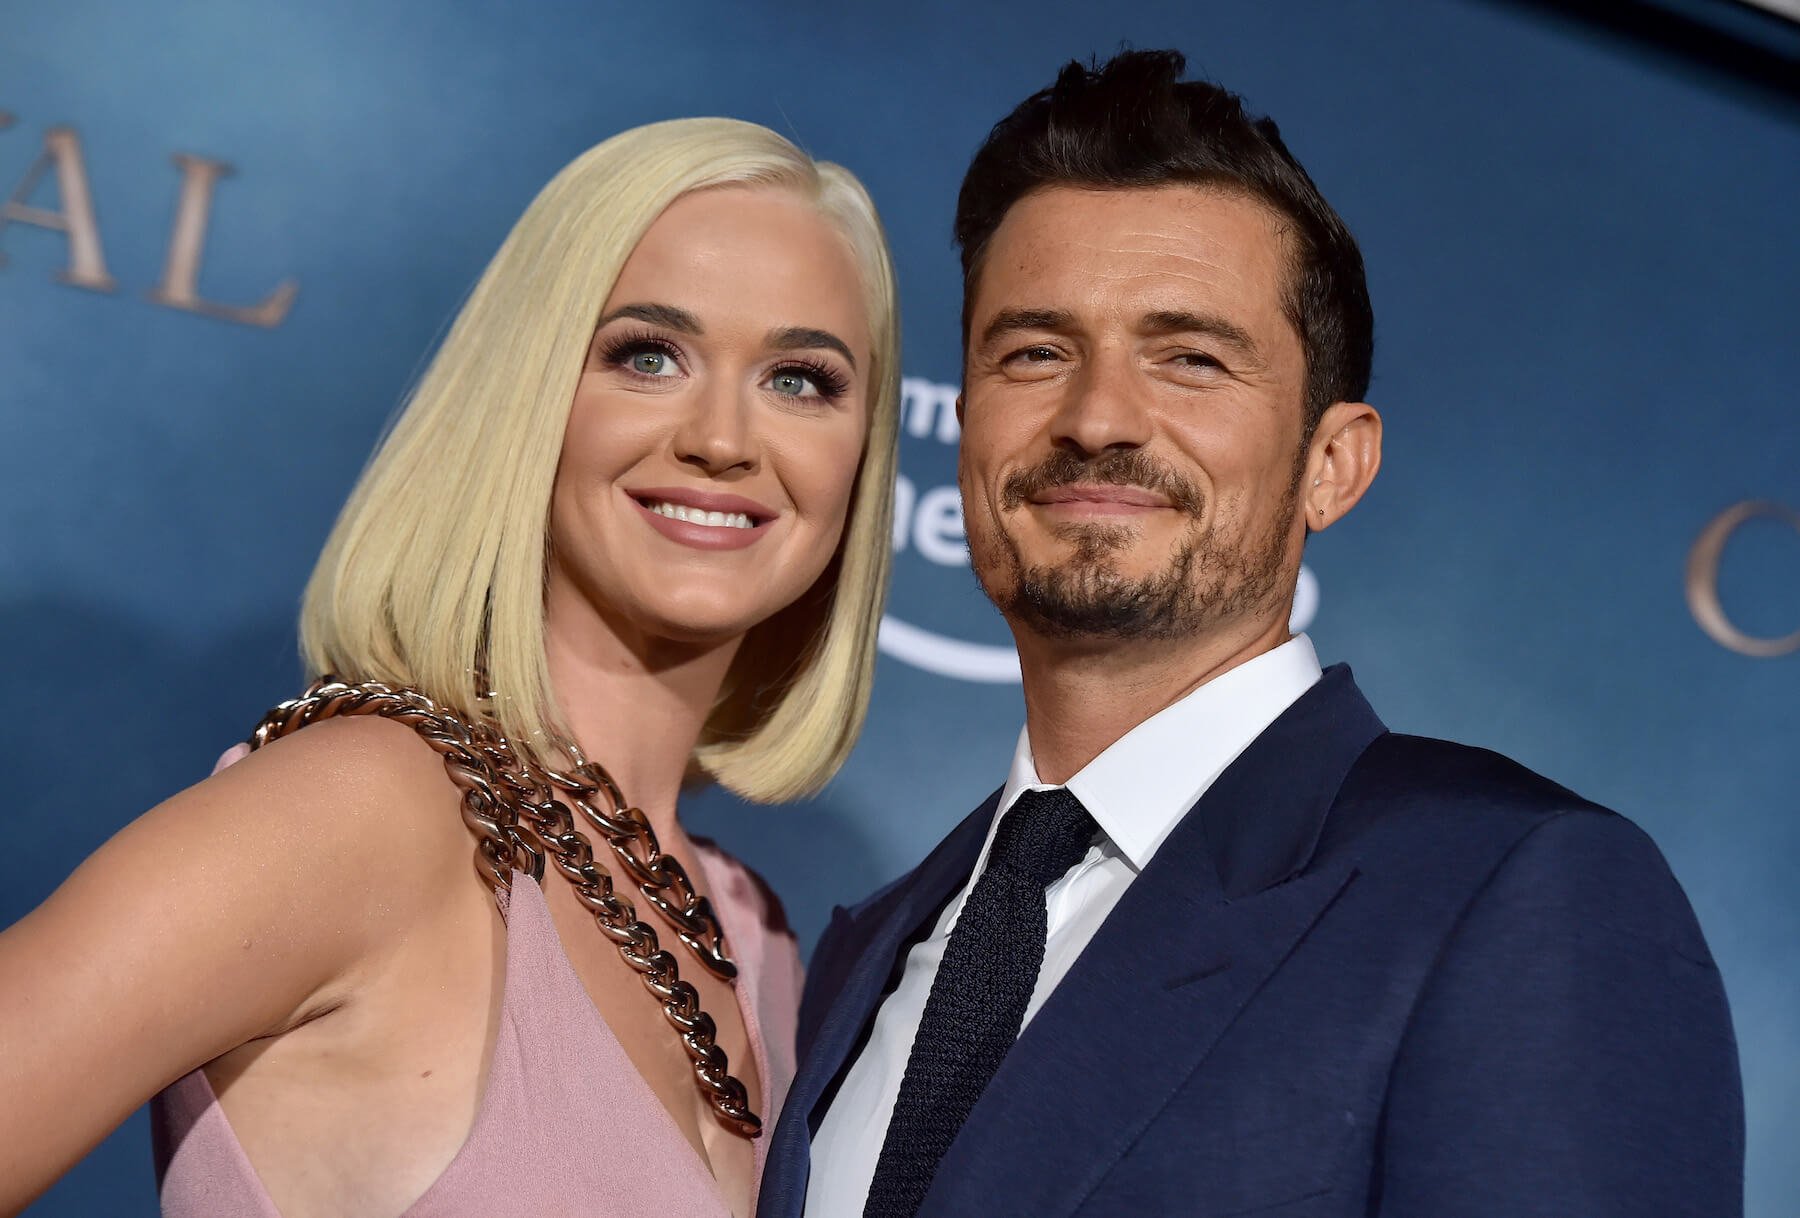 Katy Perry and Orlando Bloom smiling together at a movie premiere in 2019